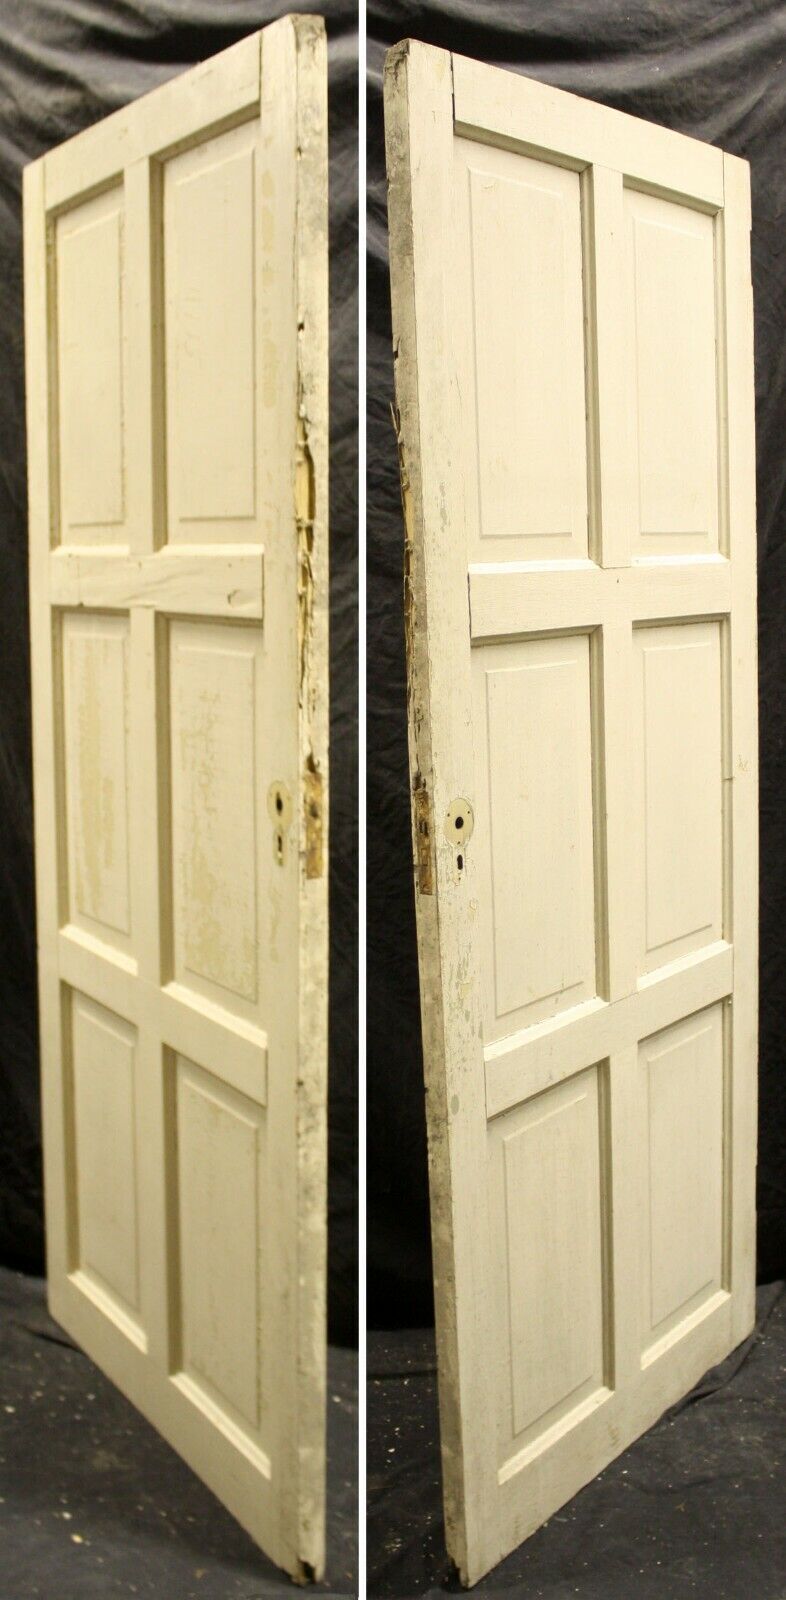 30"x69" Antique Vintage Old Reclaimed Salvaged Interior SOLID Wood Wooden Doors 6 Panels